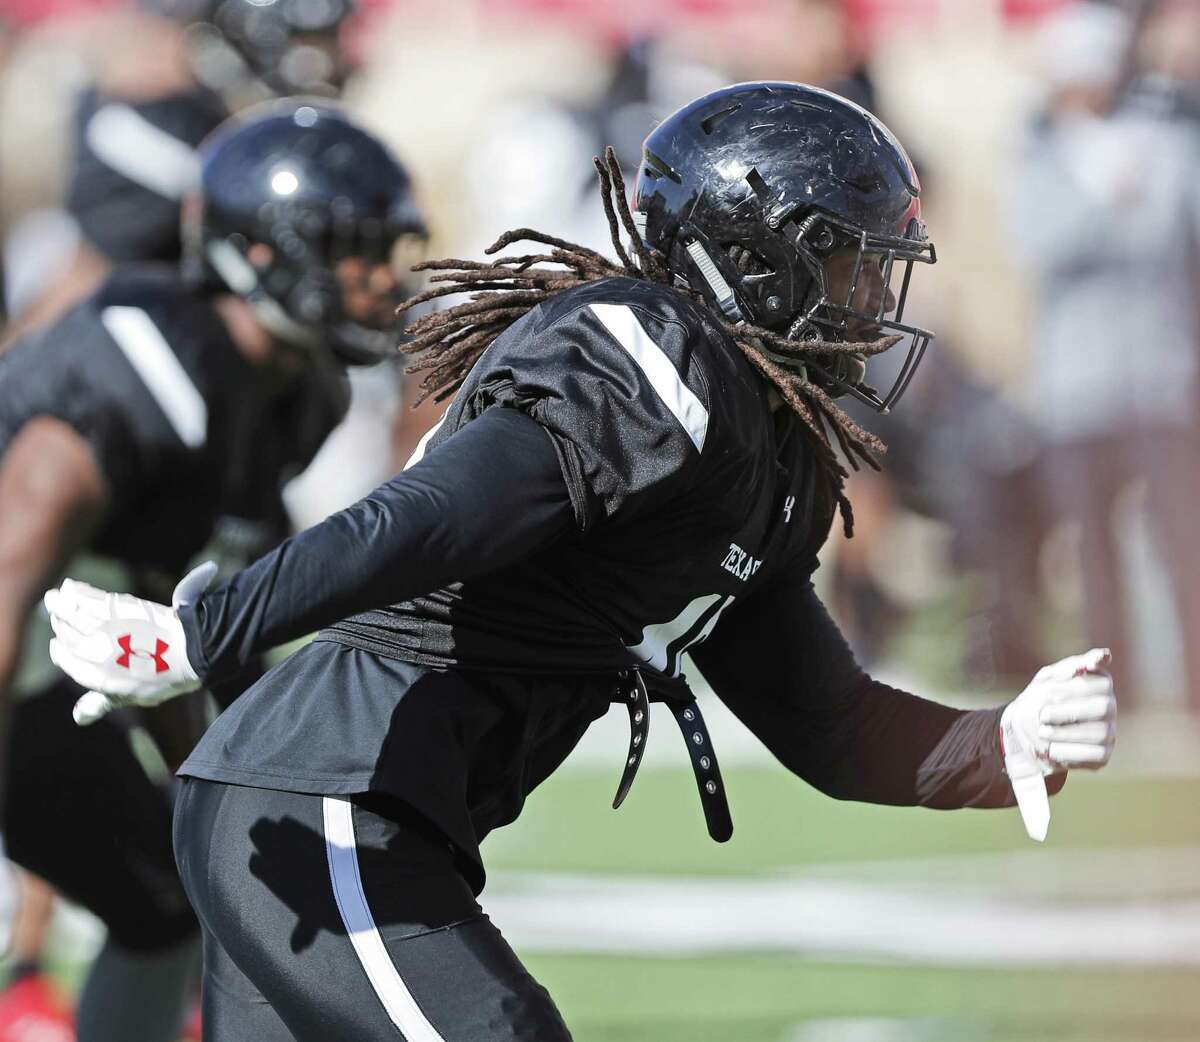 In this April 5, 2018 photo Texas Tech's Dakota Allen (40) runs down the field during NCAA college football practice in Lubbock, Texas. Allen still feels this is his last chance, even after a successful return to Texas Tech following a well-documented season at an East Mississippi junior college. After being Tech's second-leading tackler as a freshman in 2015, the linebacker was involved in an off-field incident which led to him being kicked off the team and out of school. He thought his football career was over. But he spent the 2016 season with the first team featured in Netflix's "Last Chance U" series, then got the opportunity to return to Texas Tech. He was a team captain last season and now goes into his senior year as a preseason All-Big 12 pick. (Brad Tollefson/Lubbock Avalanche-Journal via AP)